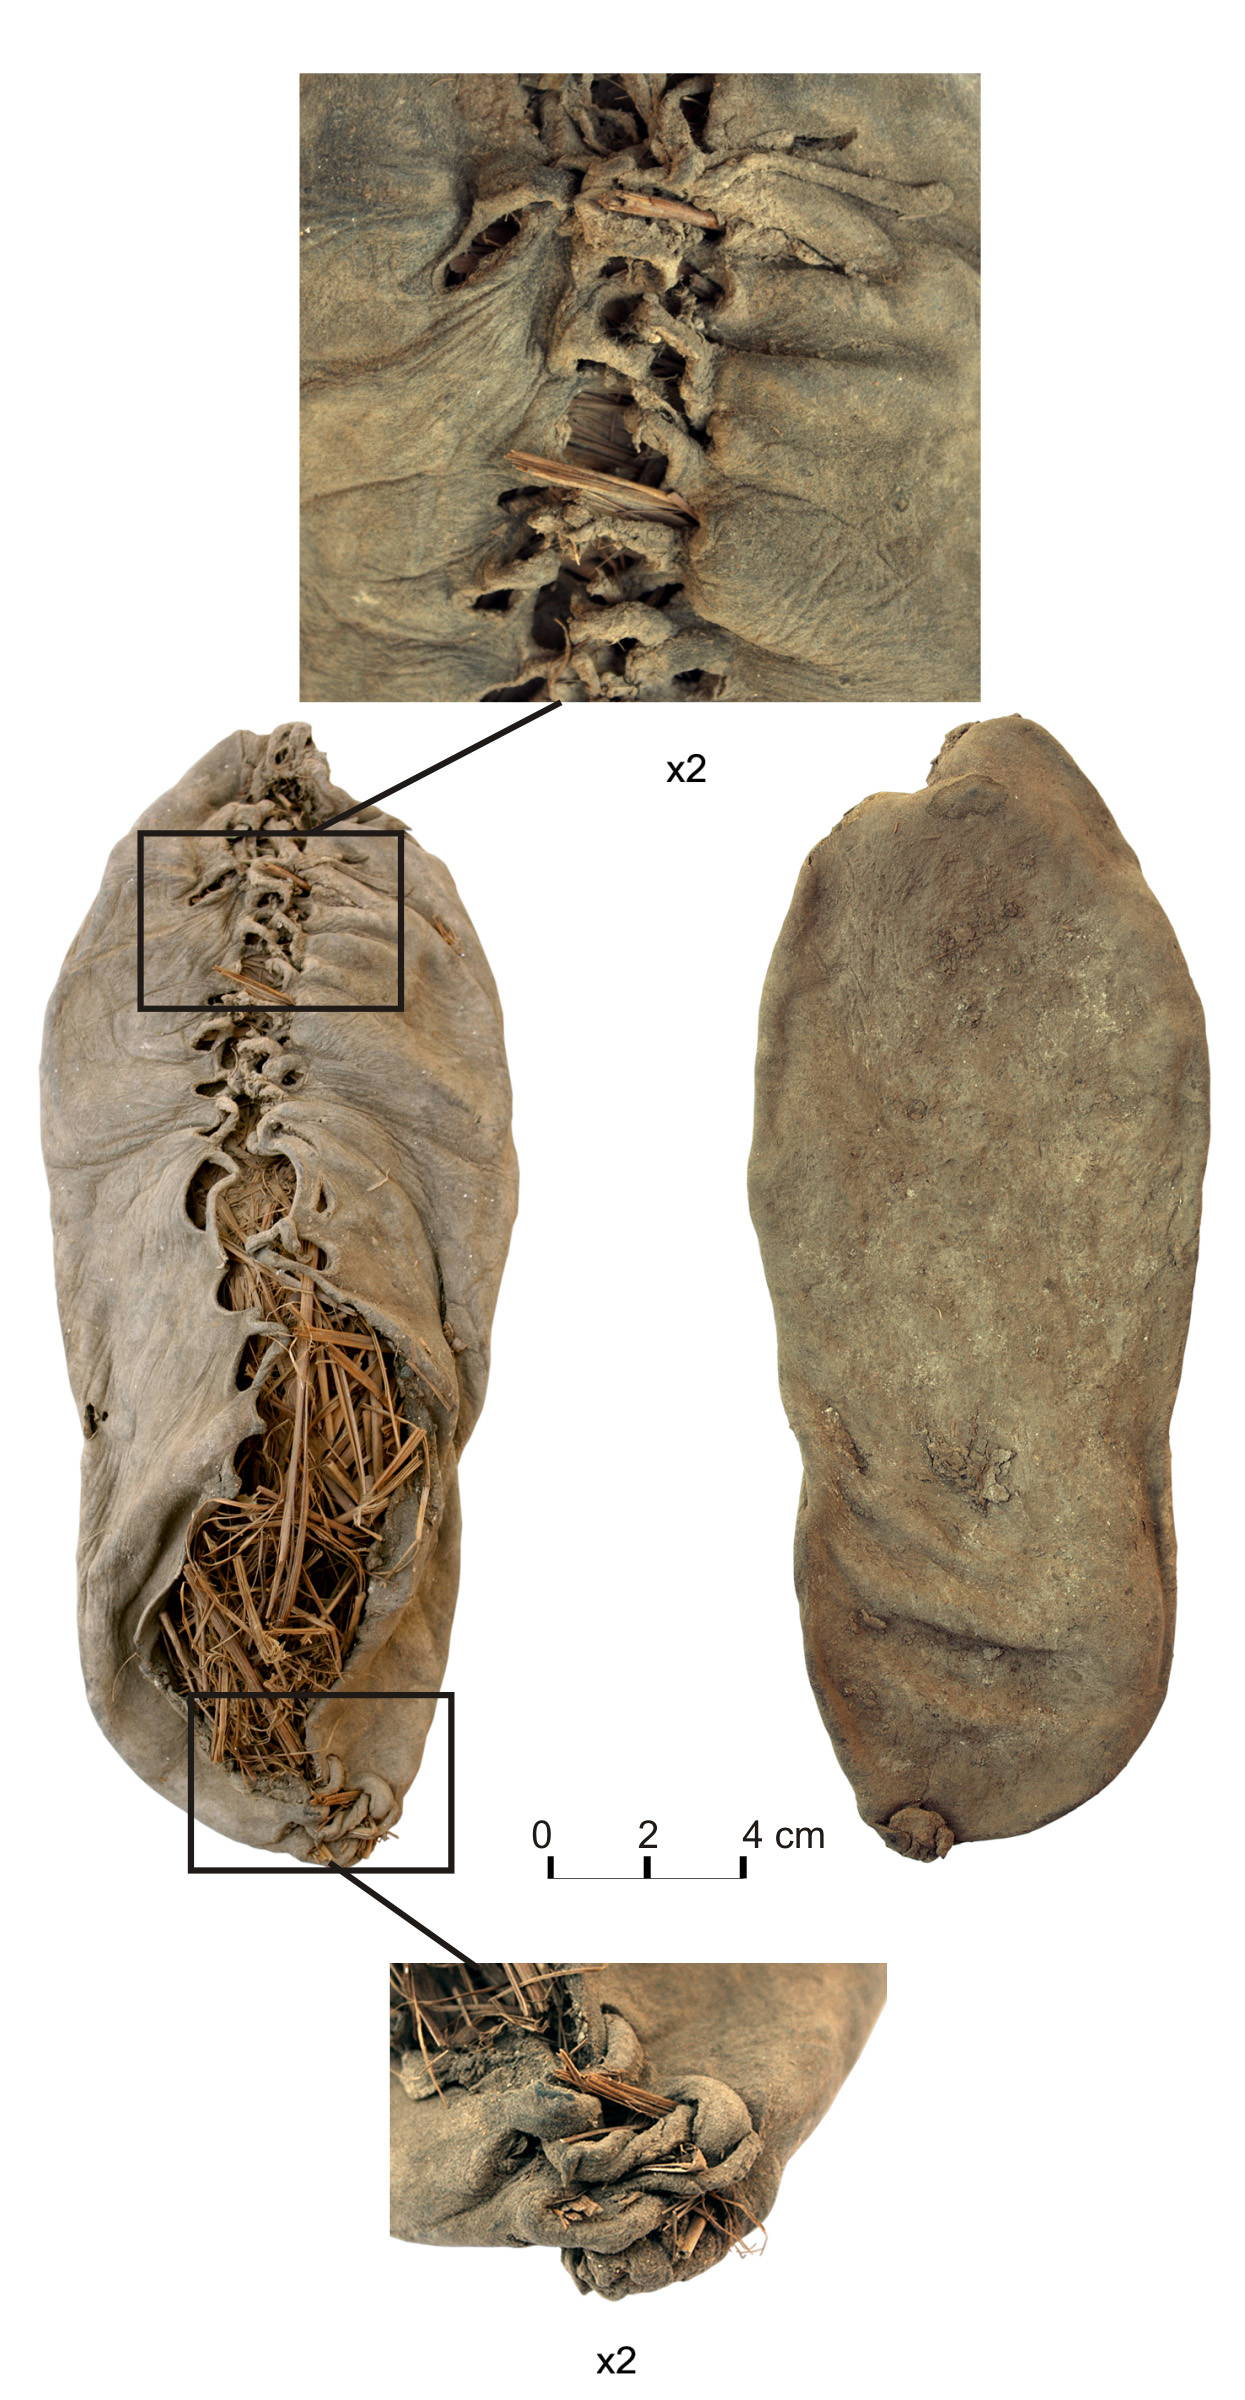 The oldest known leather shoe in the world, around 5500 years old